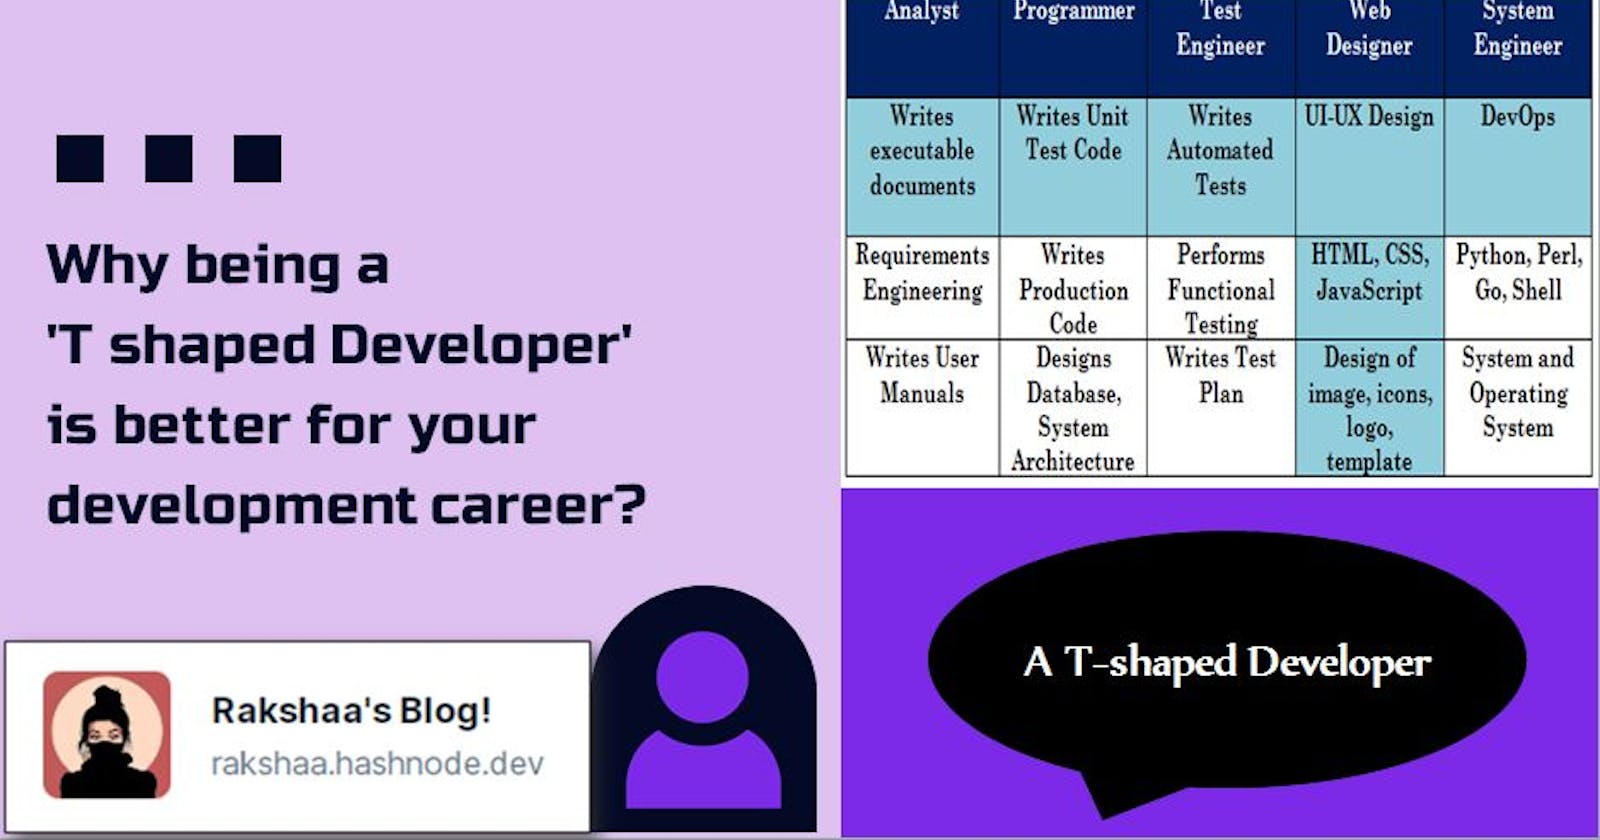 Why being a 'T shaped Developer' is better for your development career?